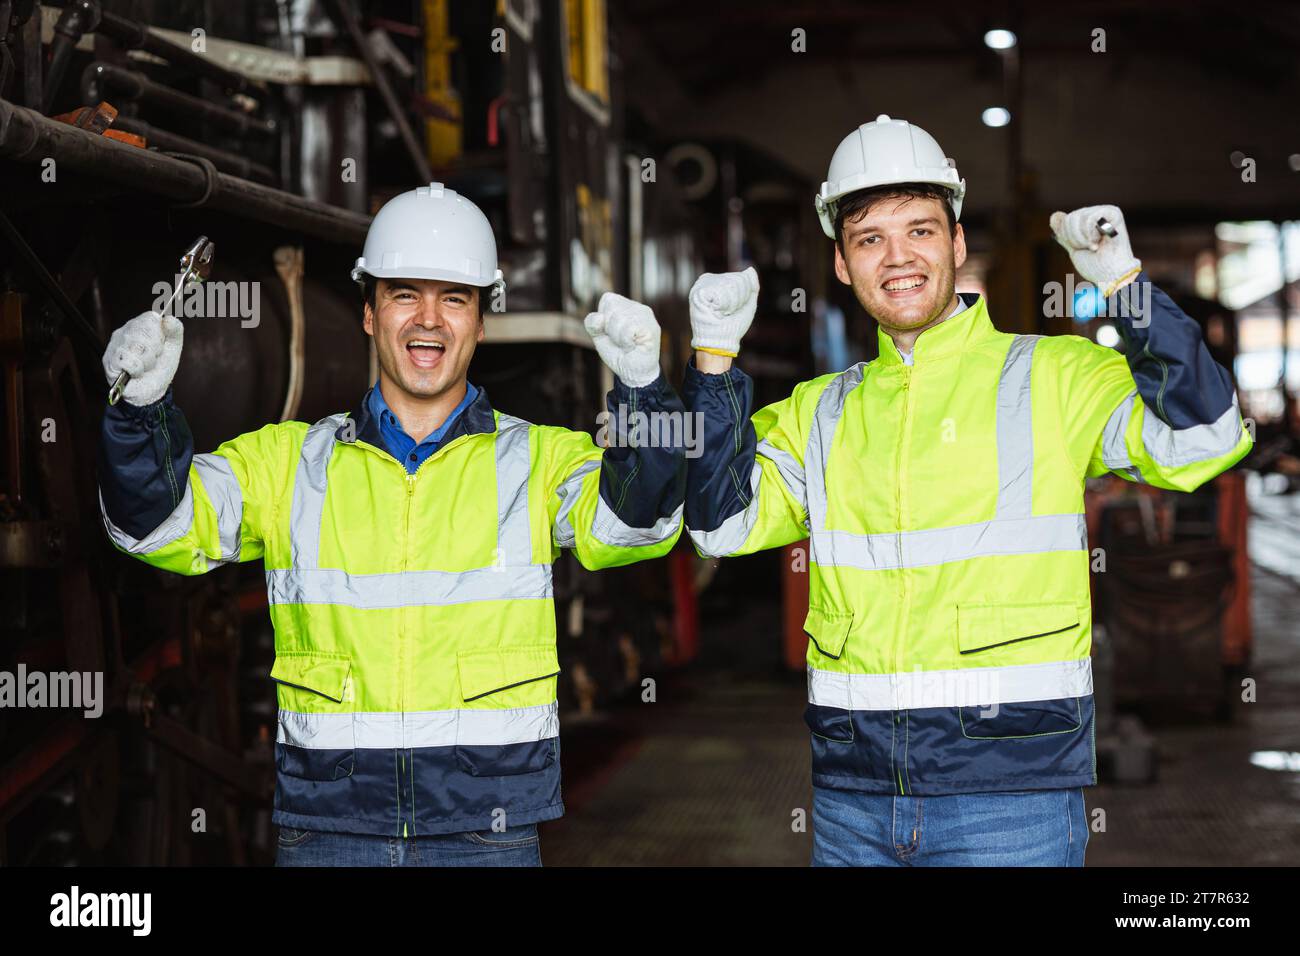 Happy cheerful engineer male team mechanic staff worker wearing reflective safety clothing with hardhat enjoy smiling together Stock Photo